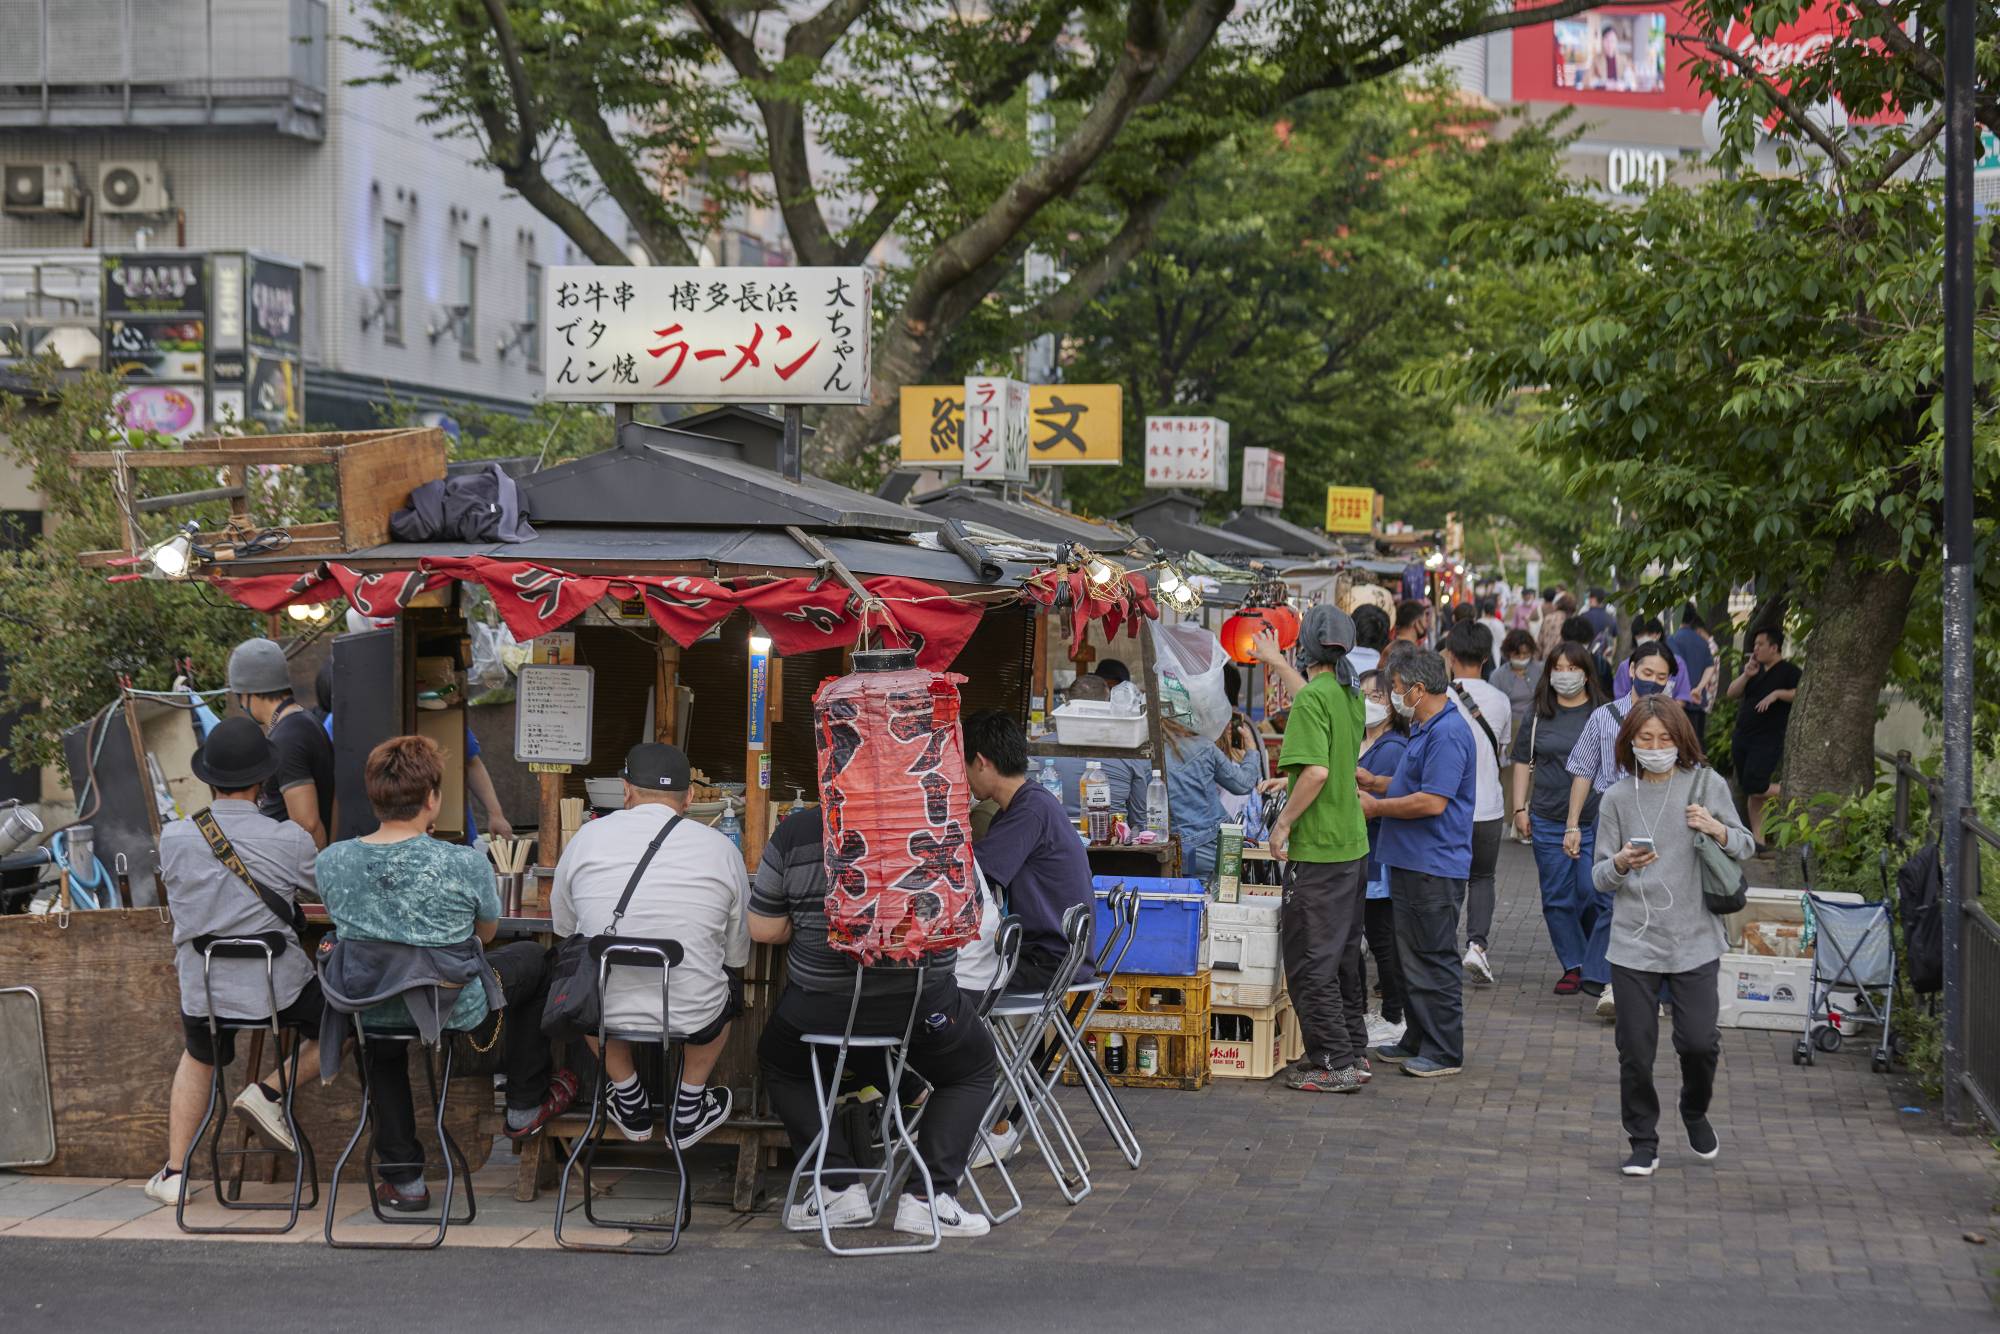 Customers eat at a mobile food stall, in the Nakasu area of Fukuoka on May 28. | BLOOMBERG